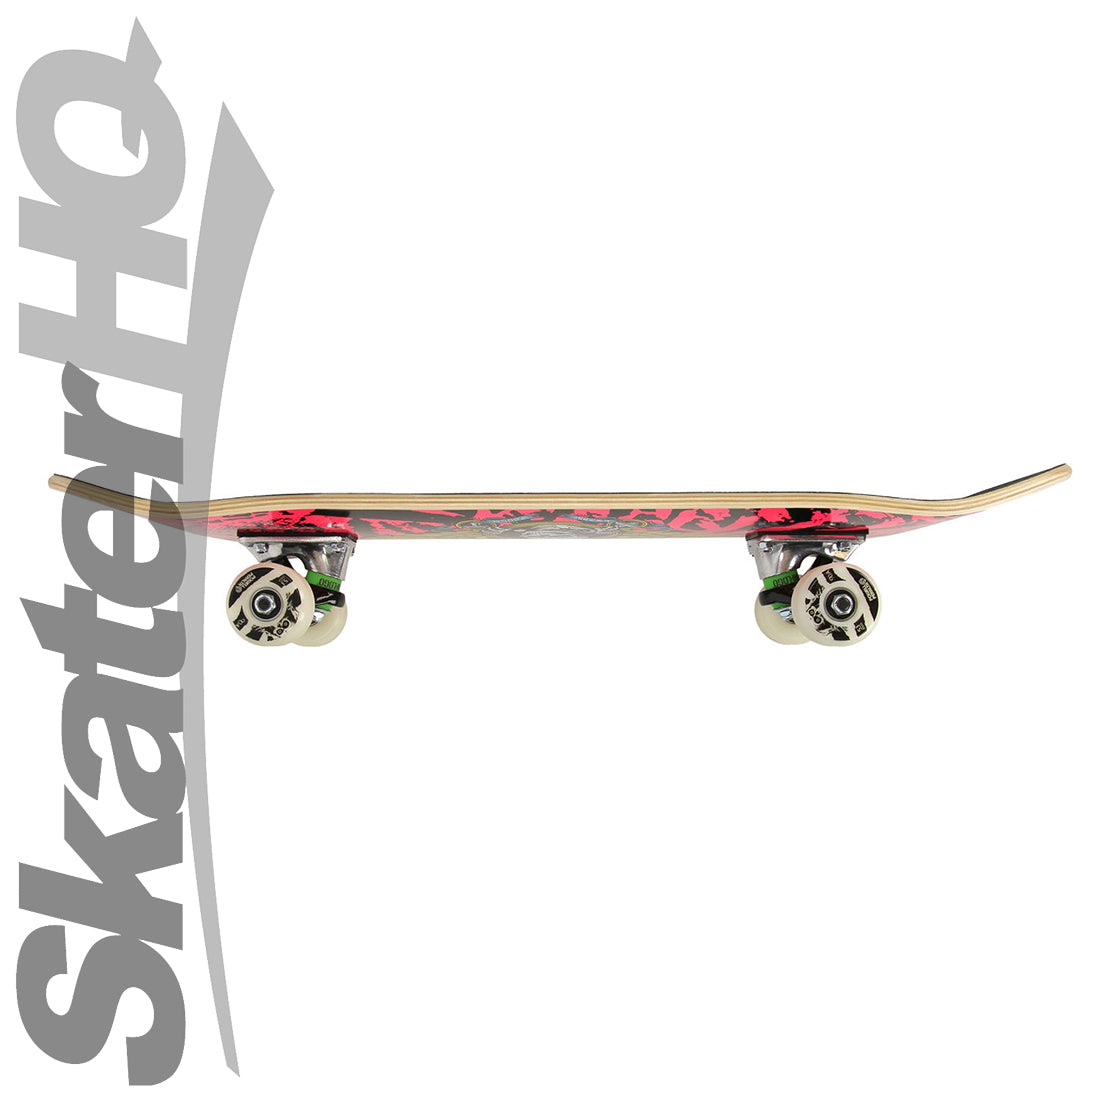 Powell Peralta Winged Ripper 7.0 S Mini Complete - Pink Skateboard Completes Modern Street